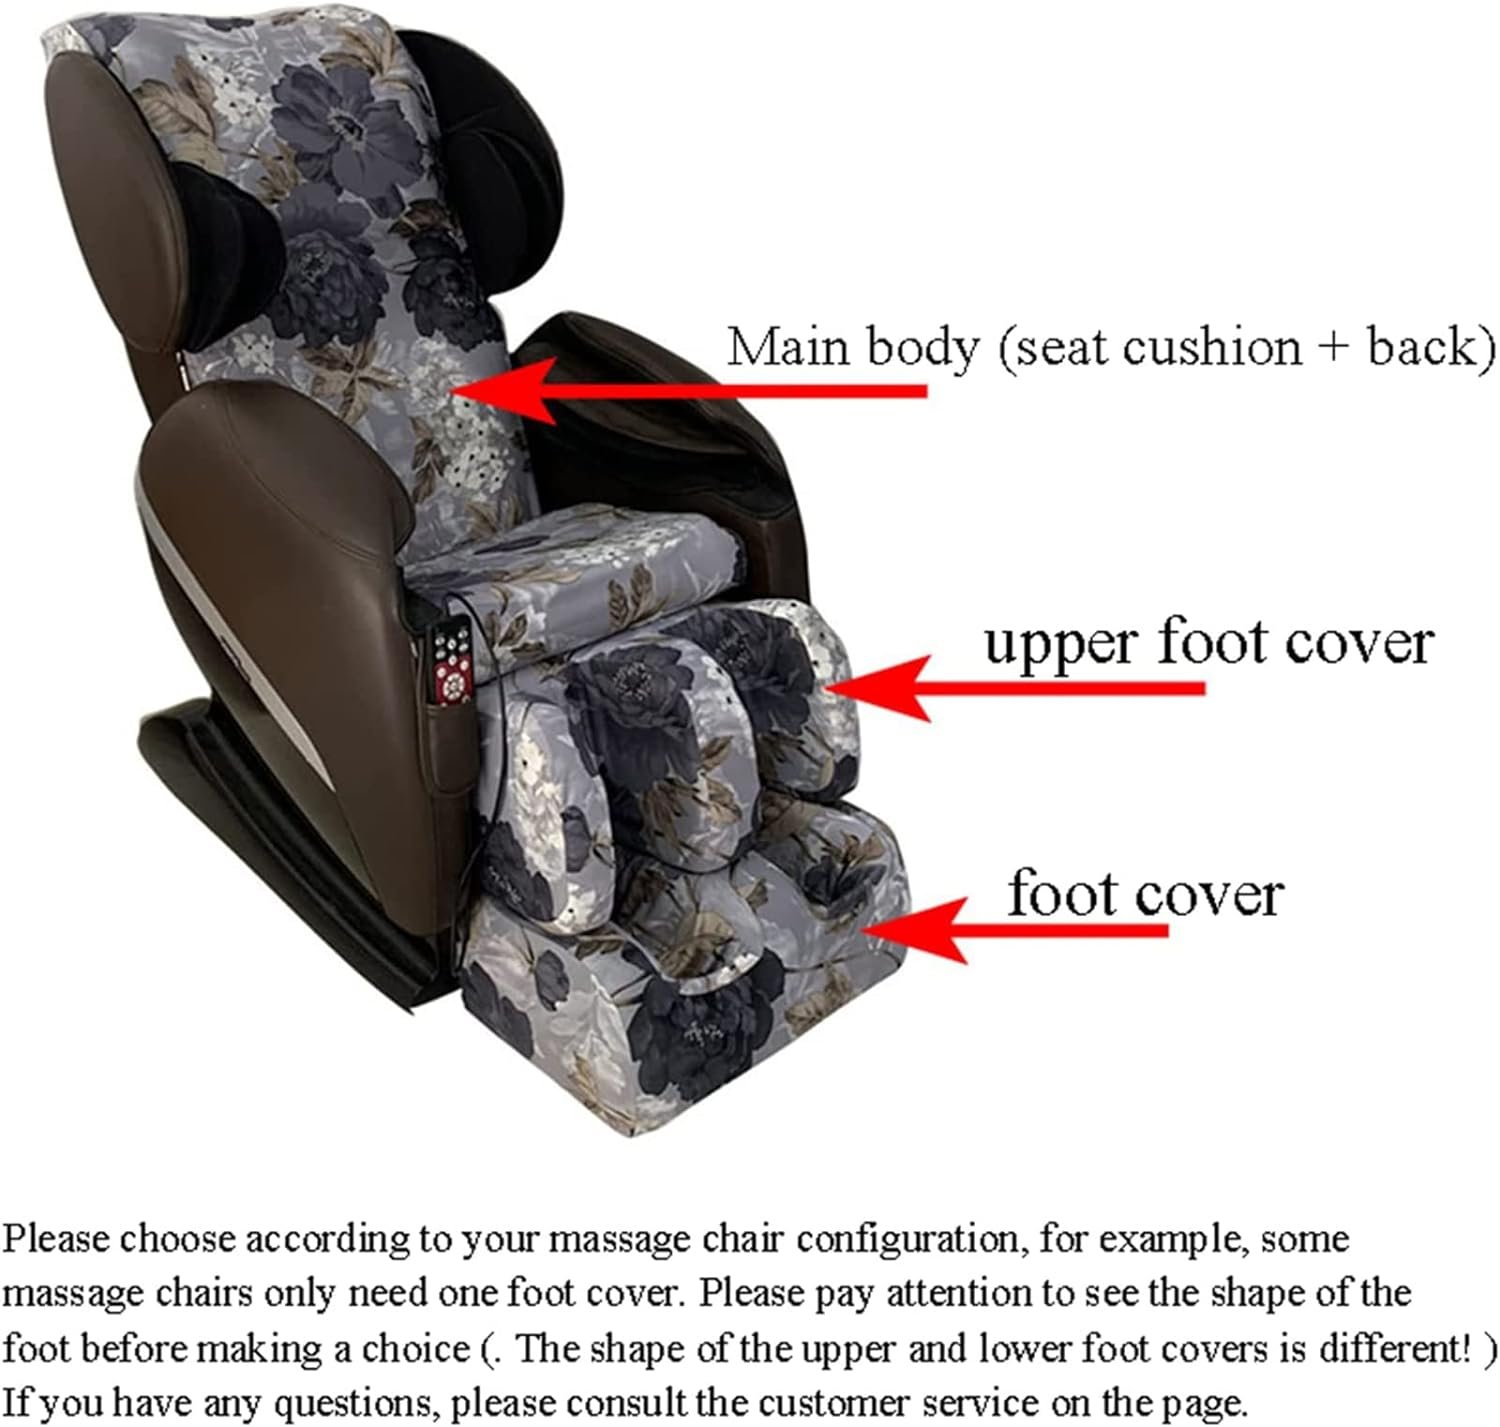 PHASFBJ Full Body Shiatsu Massage Chair Protective Cover, Super Soft Stretch Fabric Covers for Recliner Machine Washable Dustproof Cover